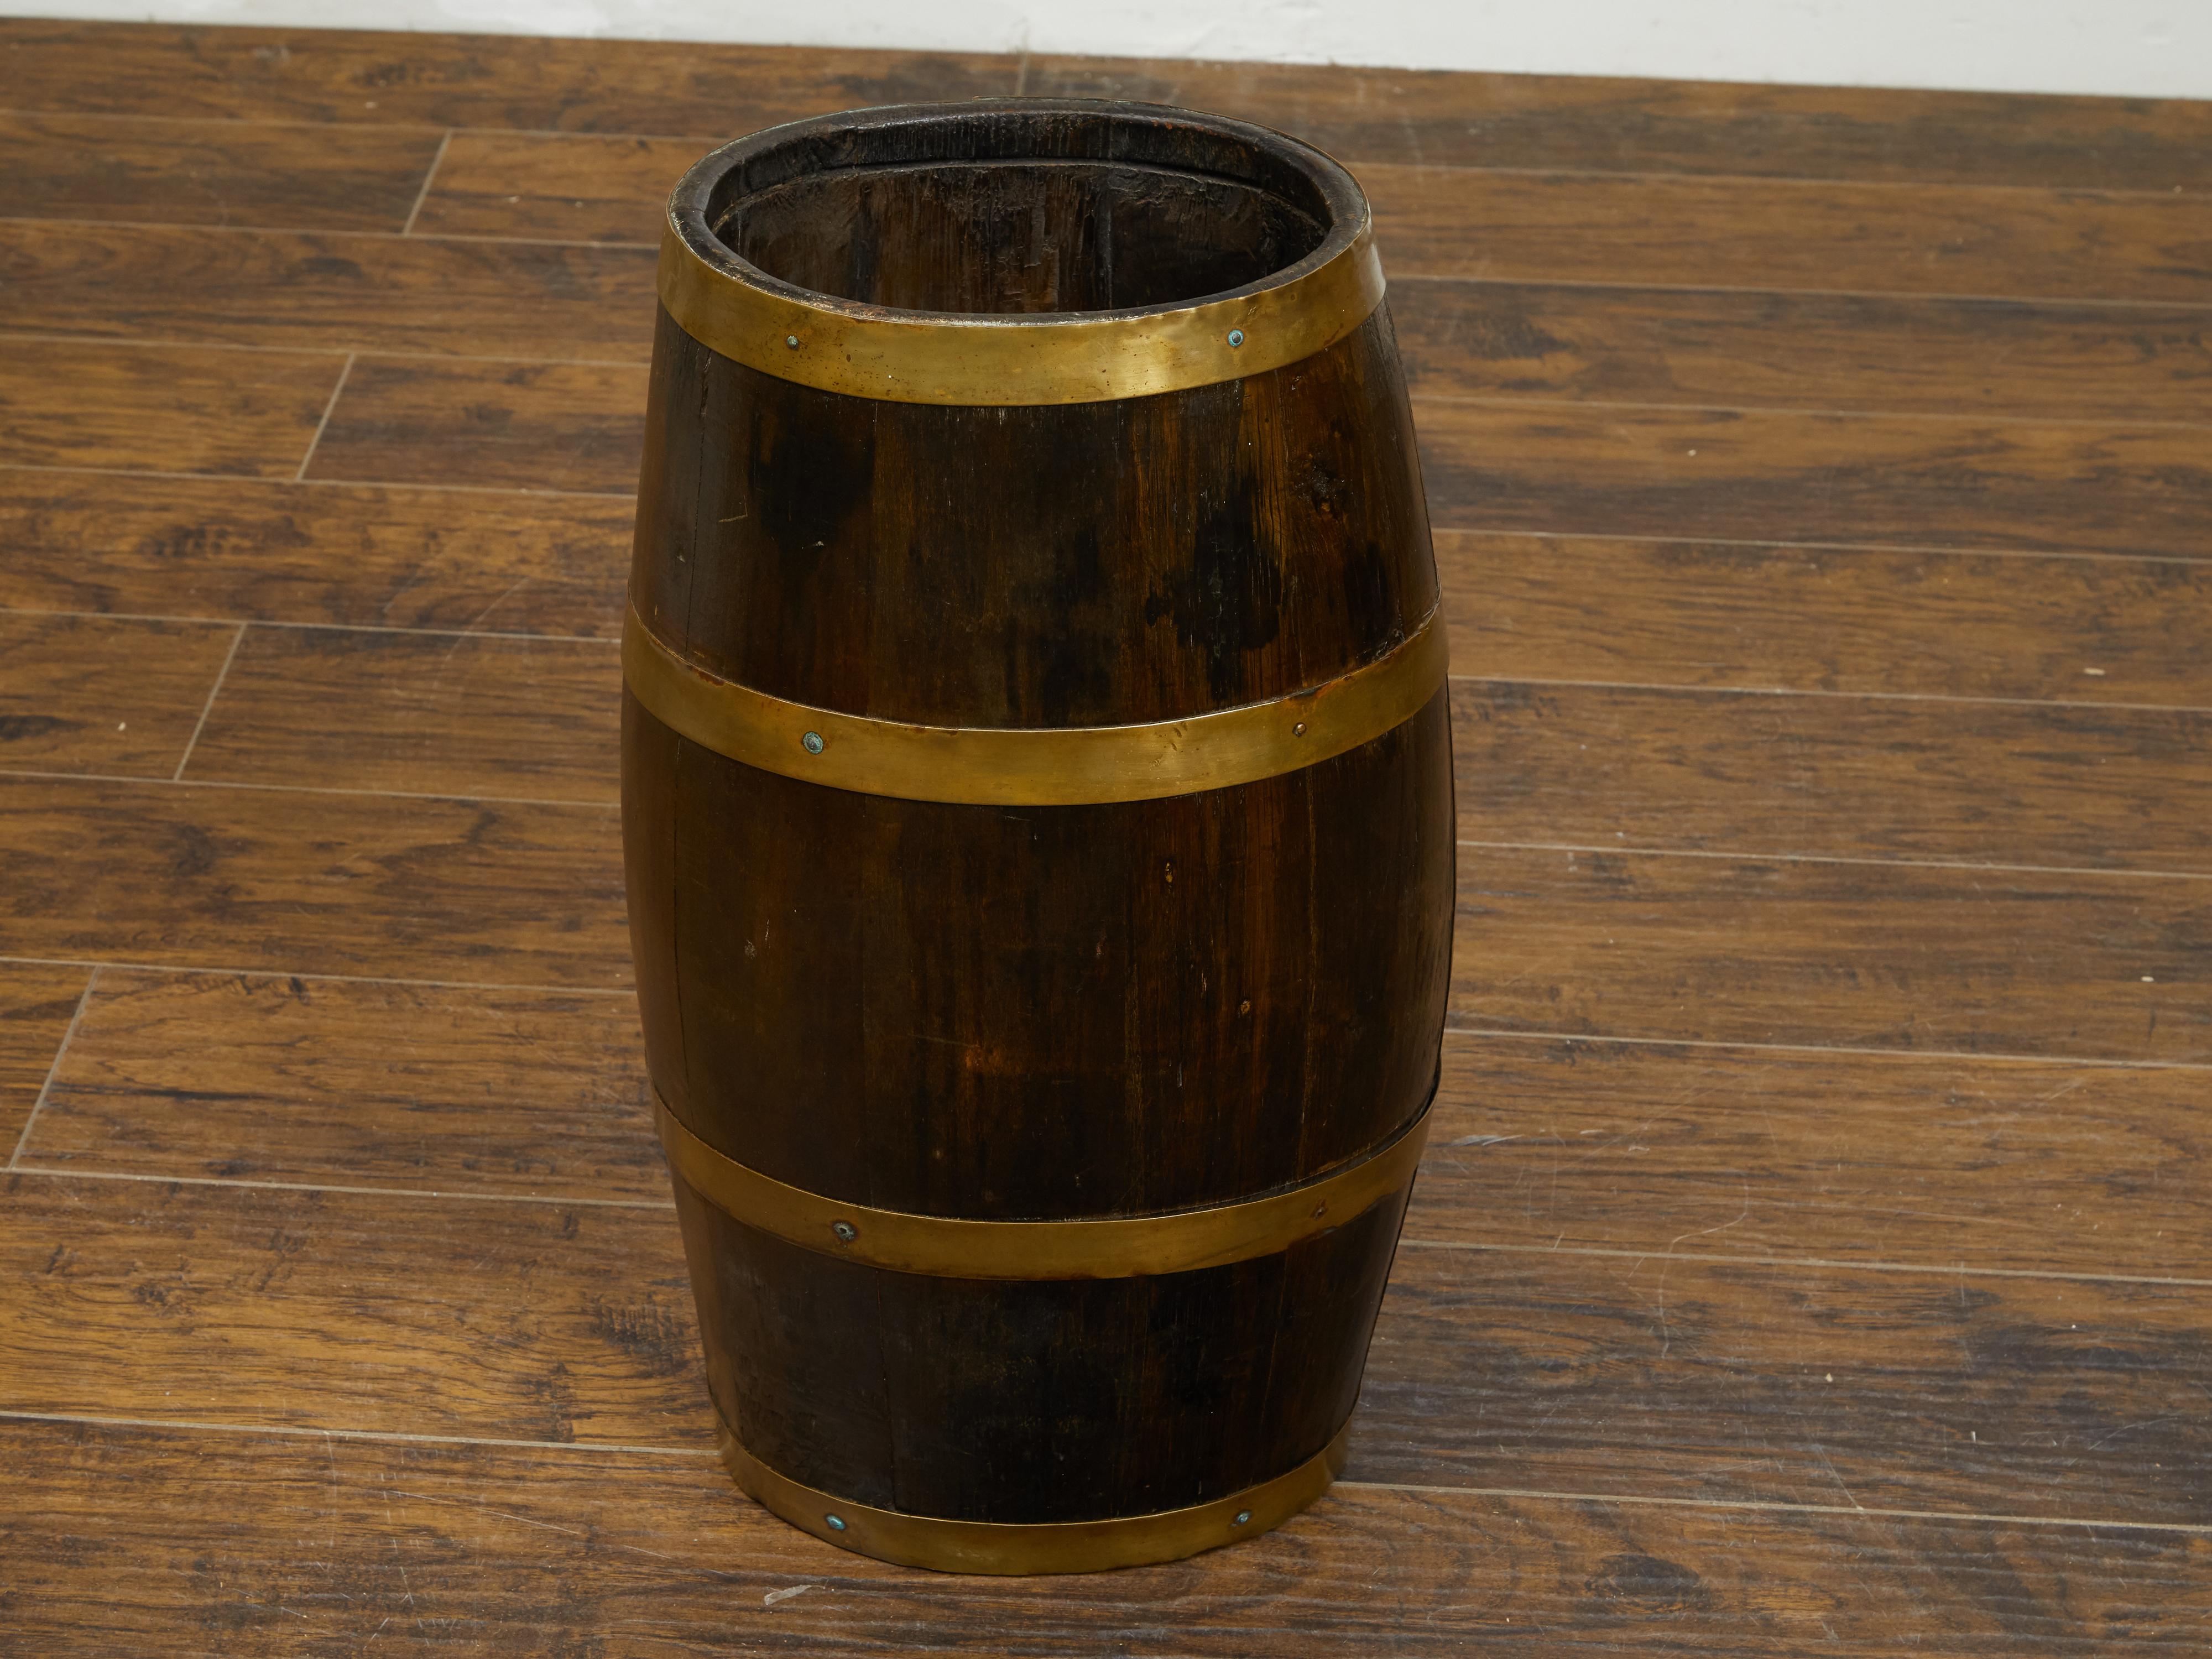 An English turn of the century oak barrel from the early 20th century, with brass braces. Created in England during the early years of the 20th century, this barrel features a sturdy oak body made vertical slats contrasted by the golden tones of the